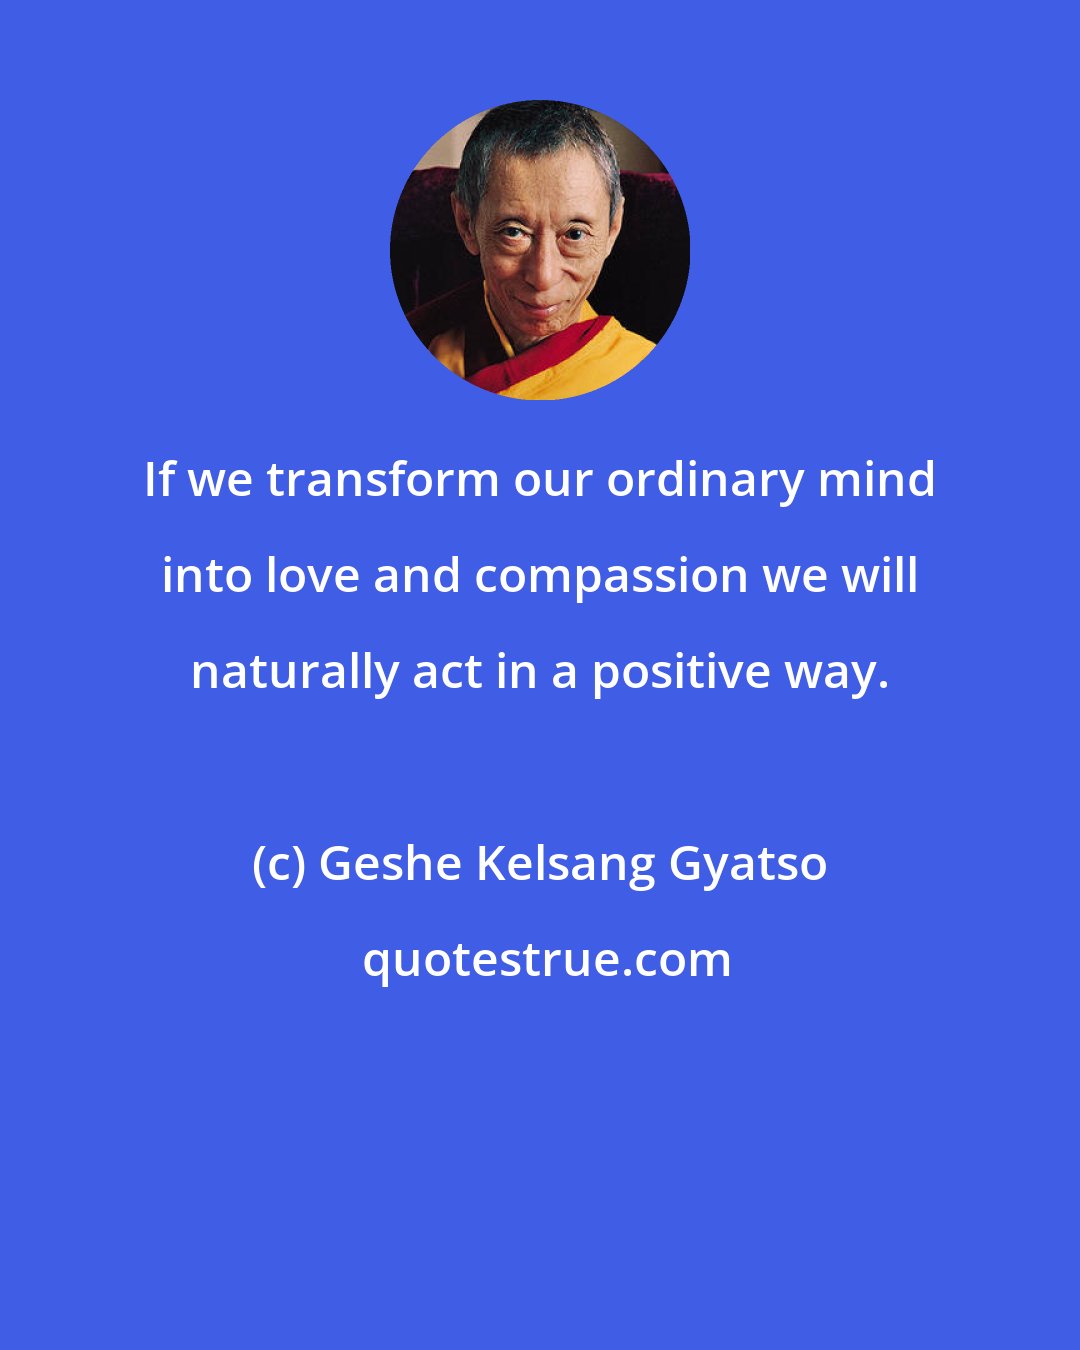 Geshe Kelsang Gyatso: If we transform our ordinary mind into love and compassion we will naturally act in a positive way.